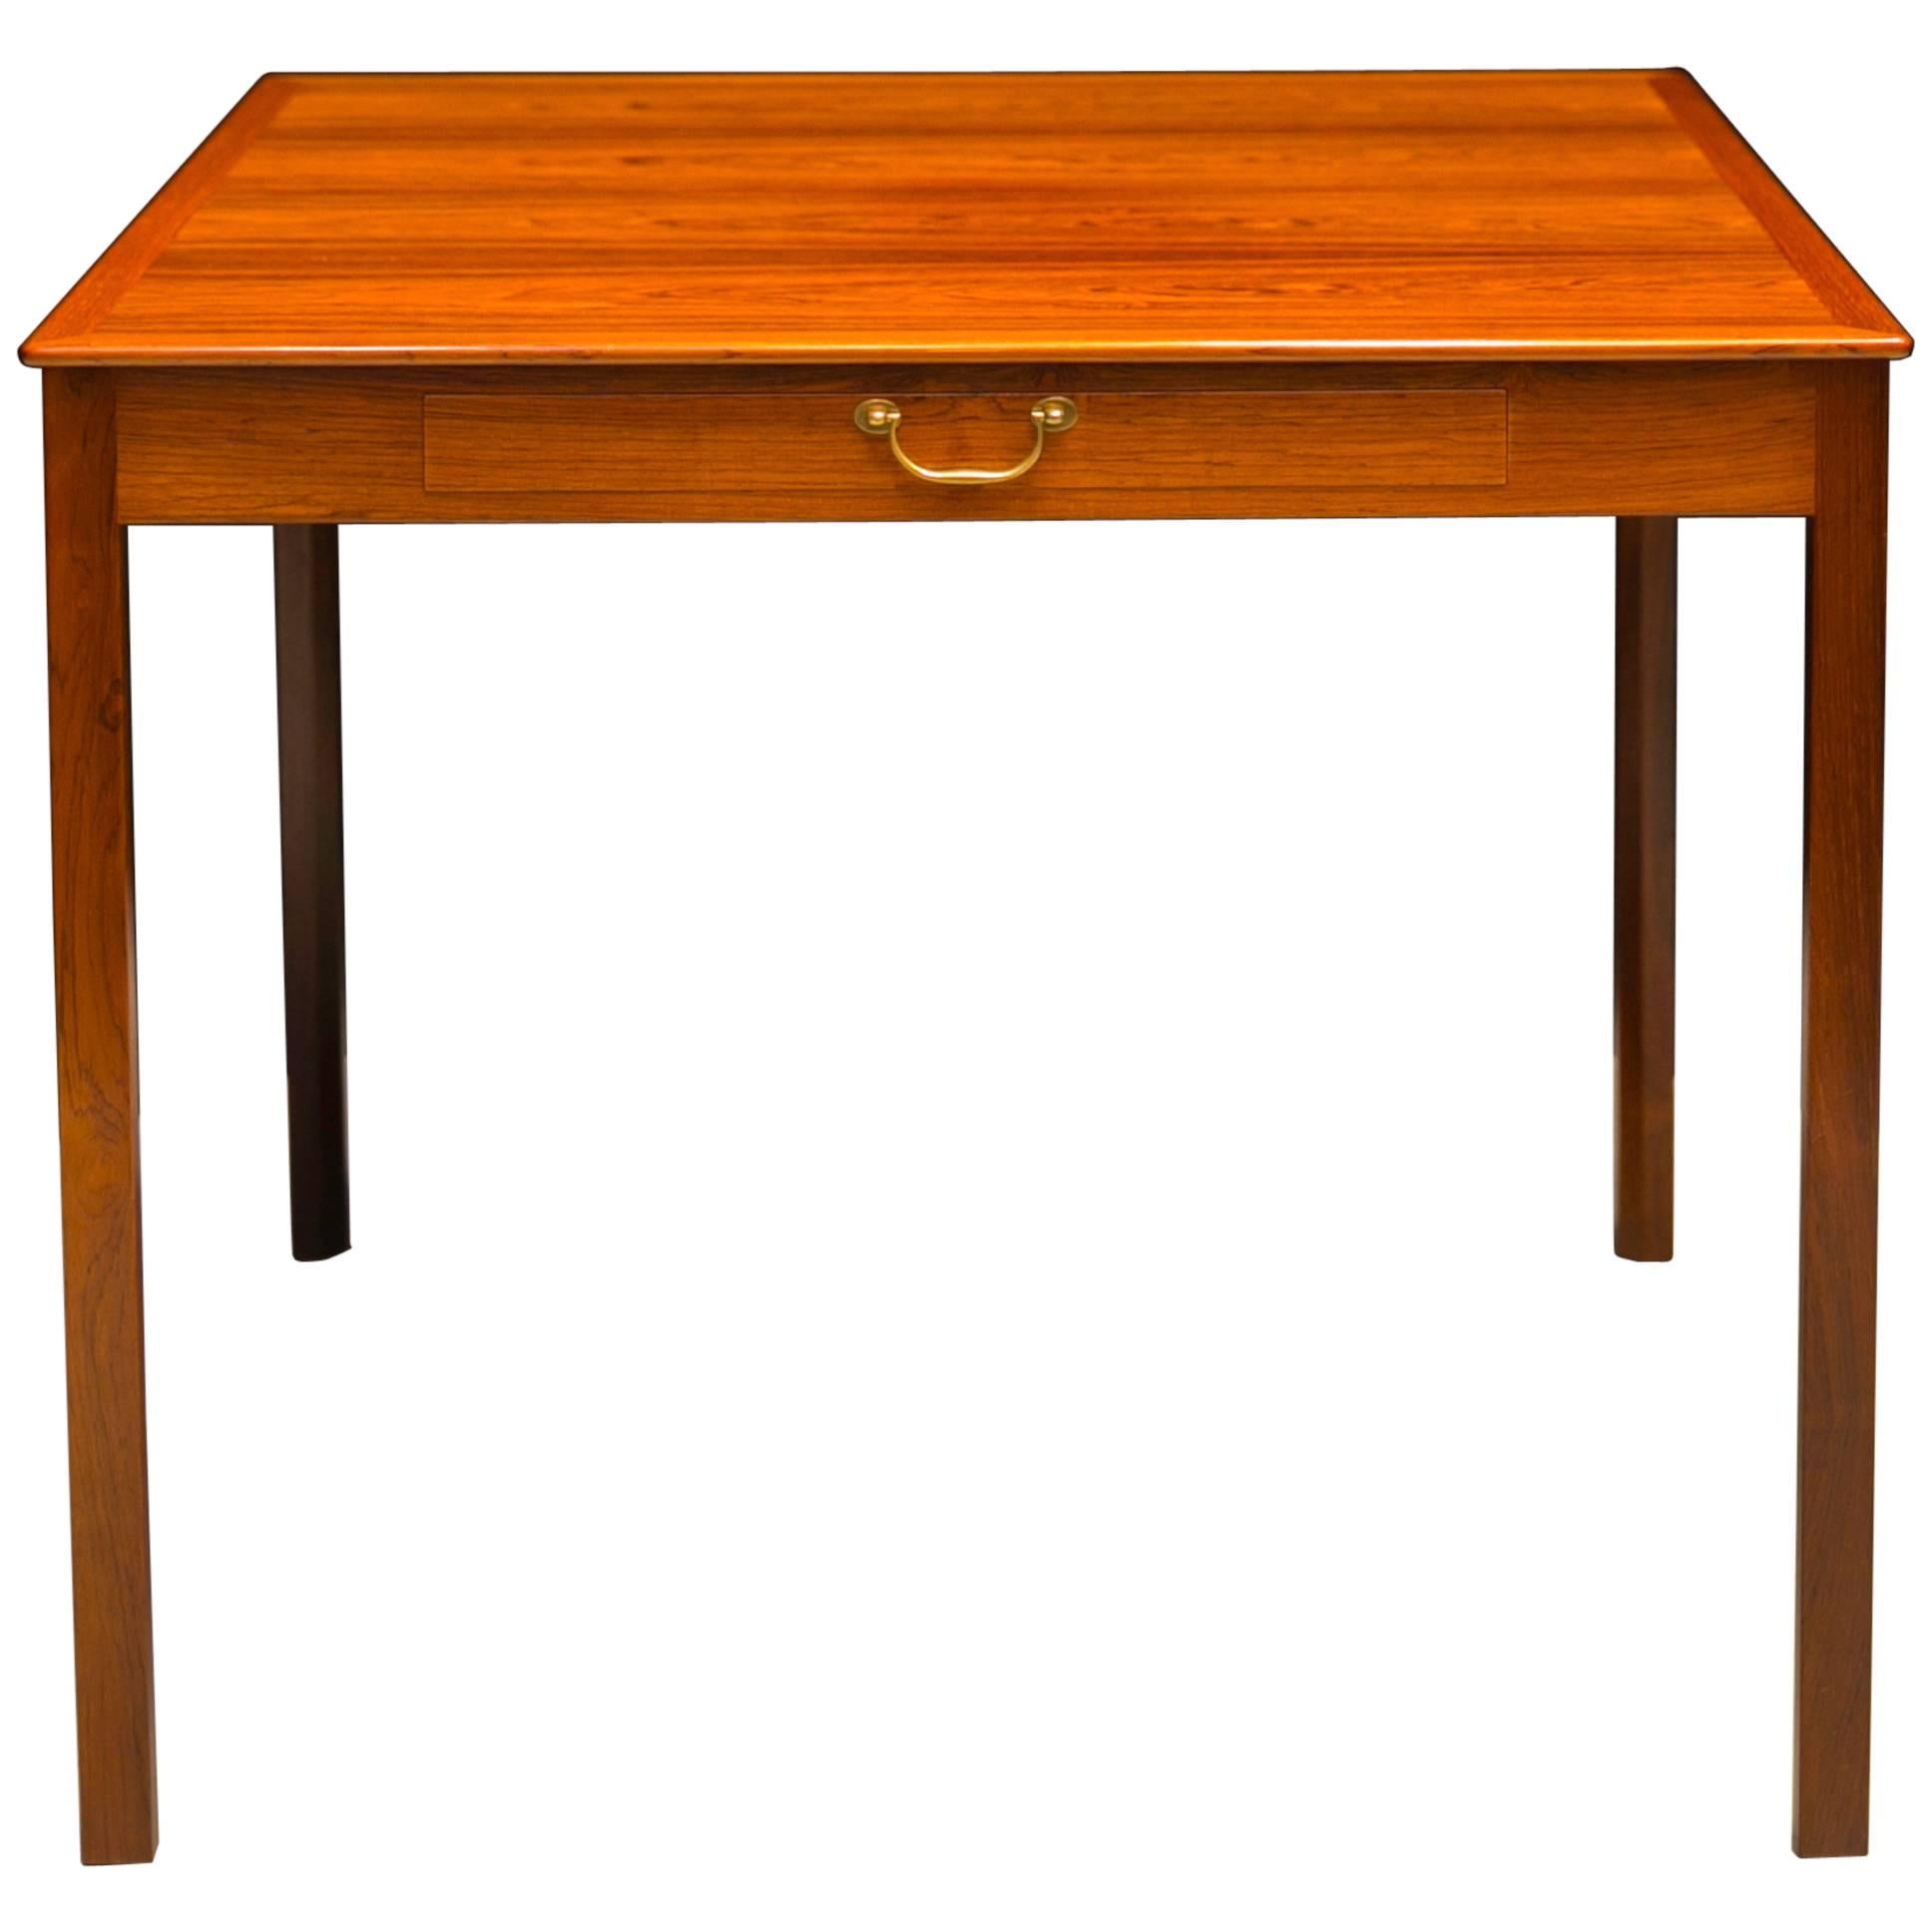 Ole Wanscher's Elegant and Refined Brazilian Rosewood Games Table with Drawer  For Sale